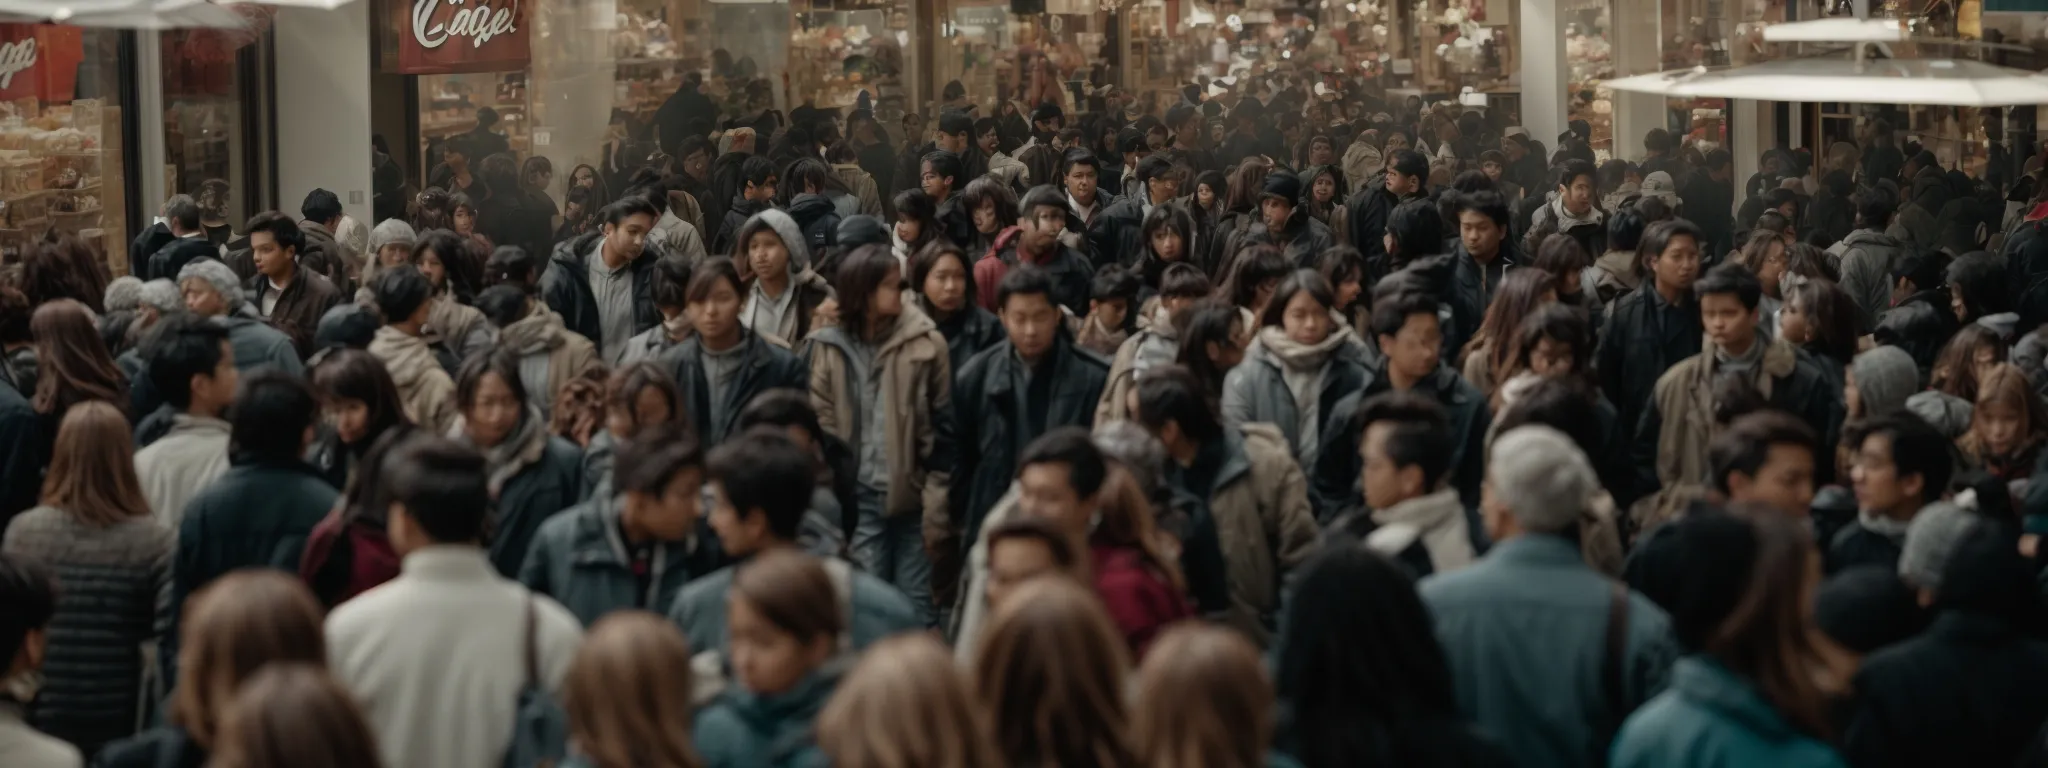 a bustling crowd of shoppers eagerly rushing into a store filled with discount signs for black friday sales.